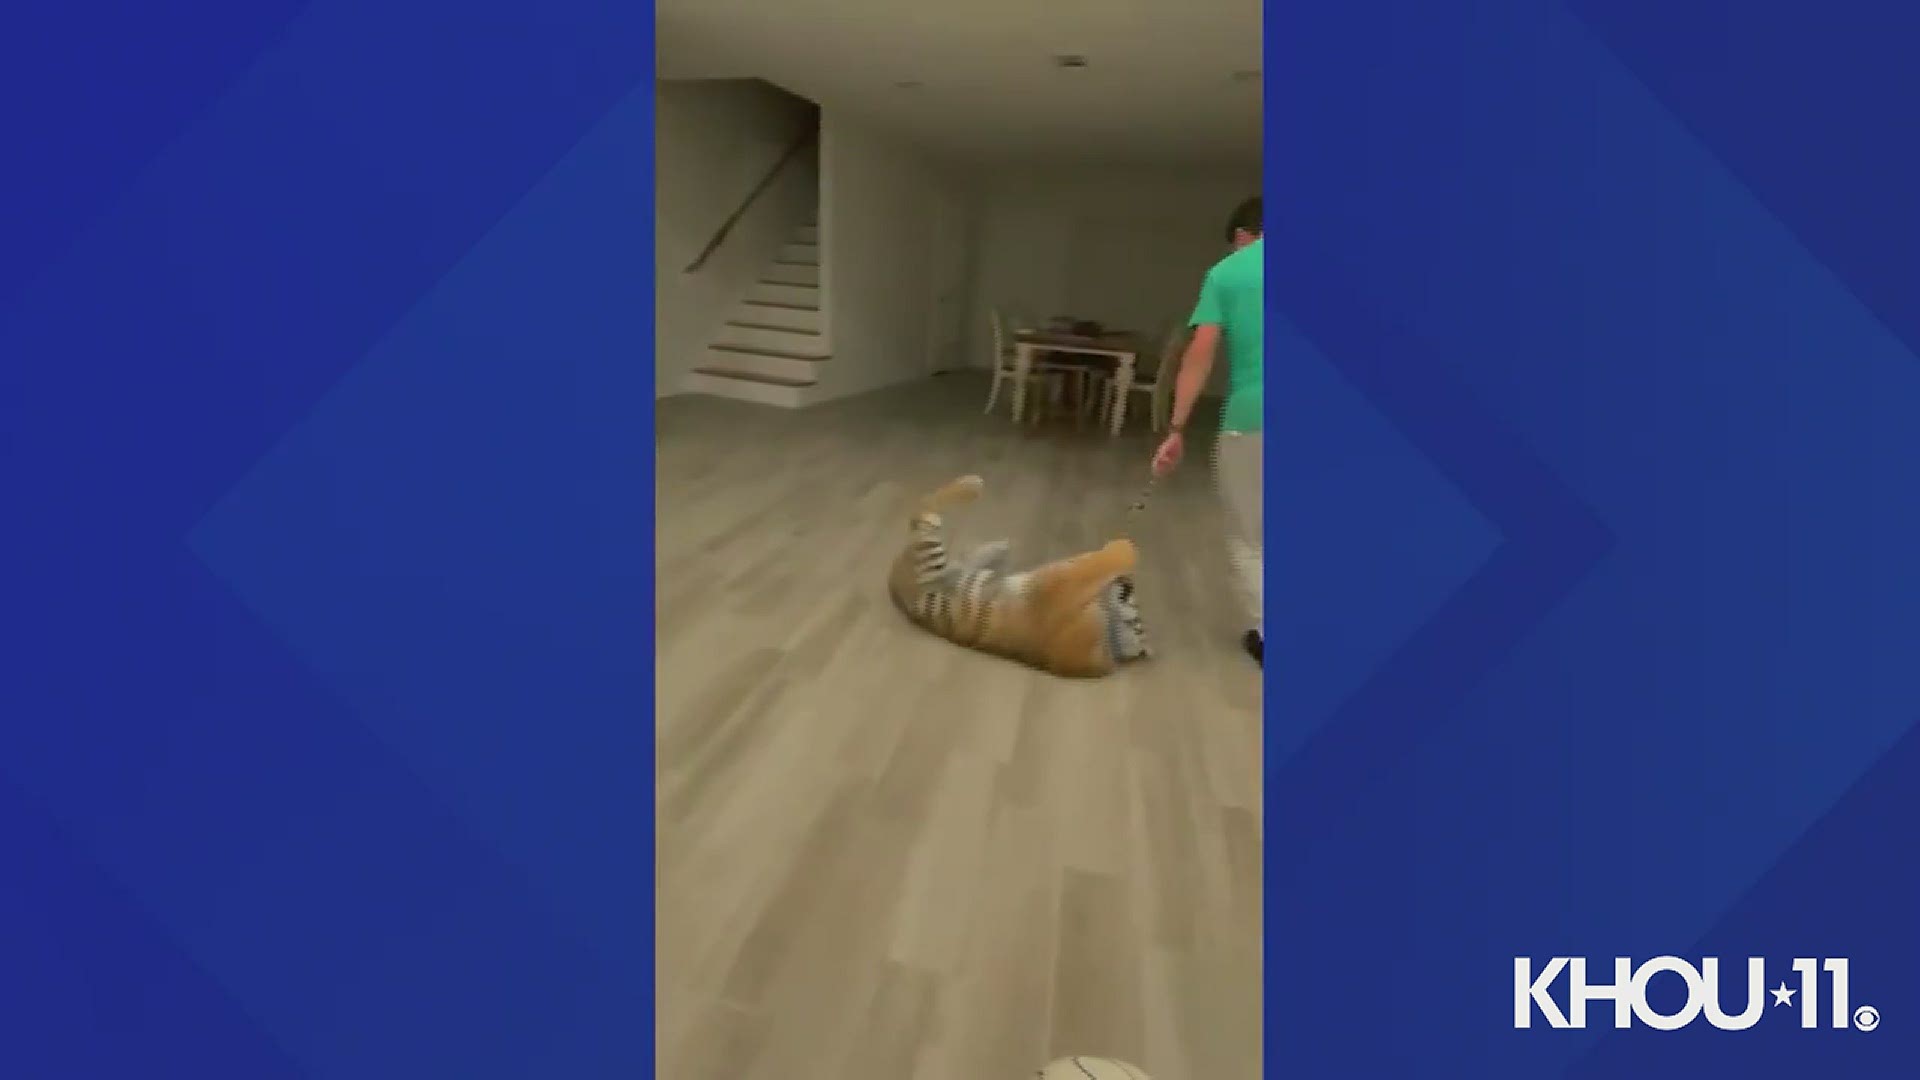 The attorney of Victor Cuevas, 26, provided a video of his client playing indoors with India the tiger. The attorney says Cuevas was the animal's caretaker.